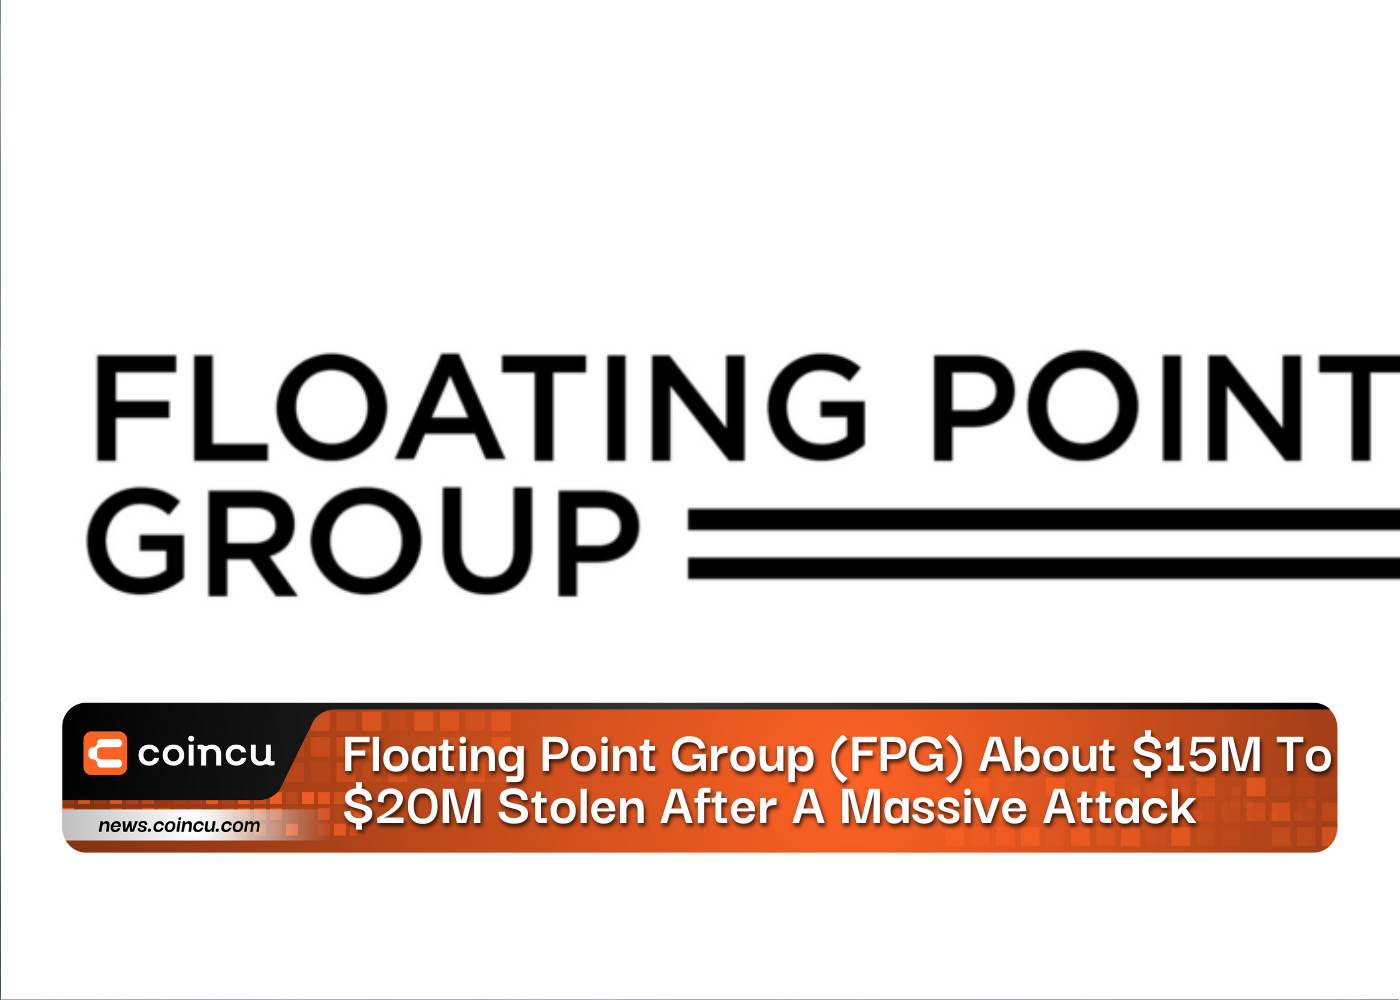 Floating Point Group (FPG) About $15M To $20M Stolen After A Massive Attack